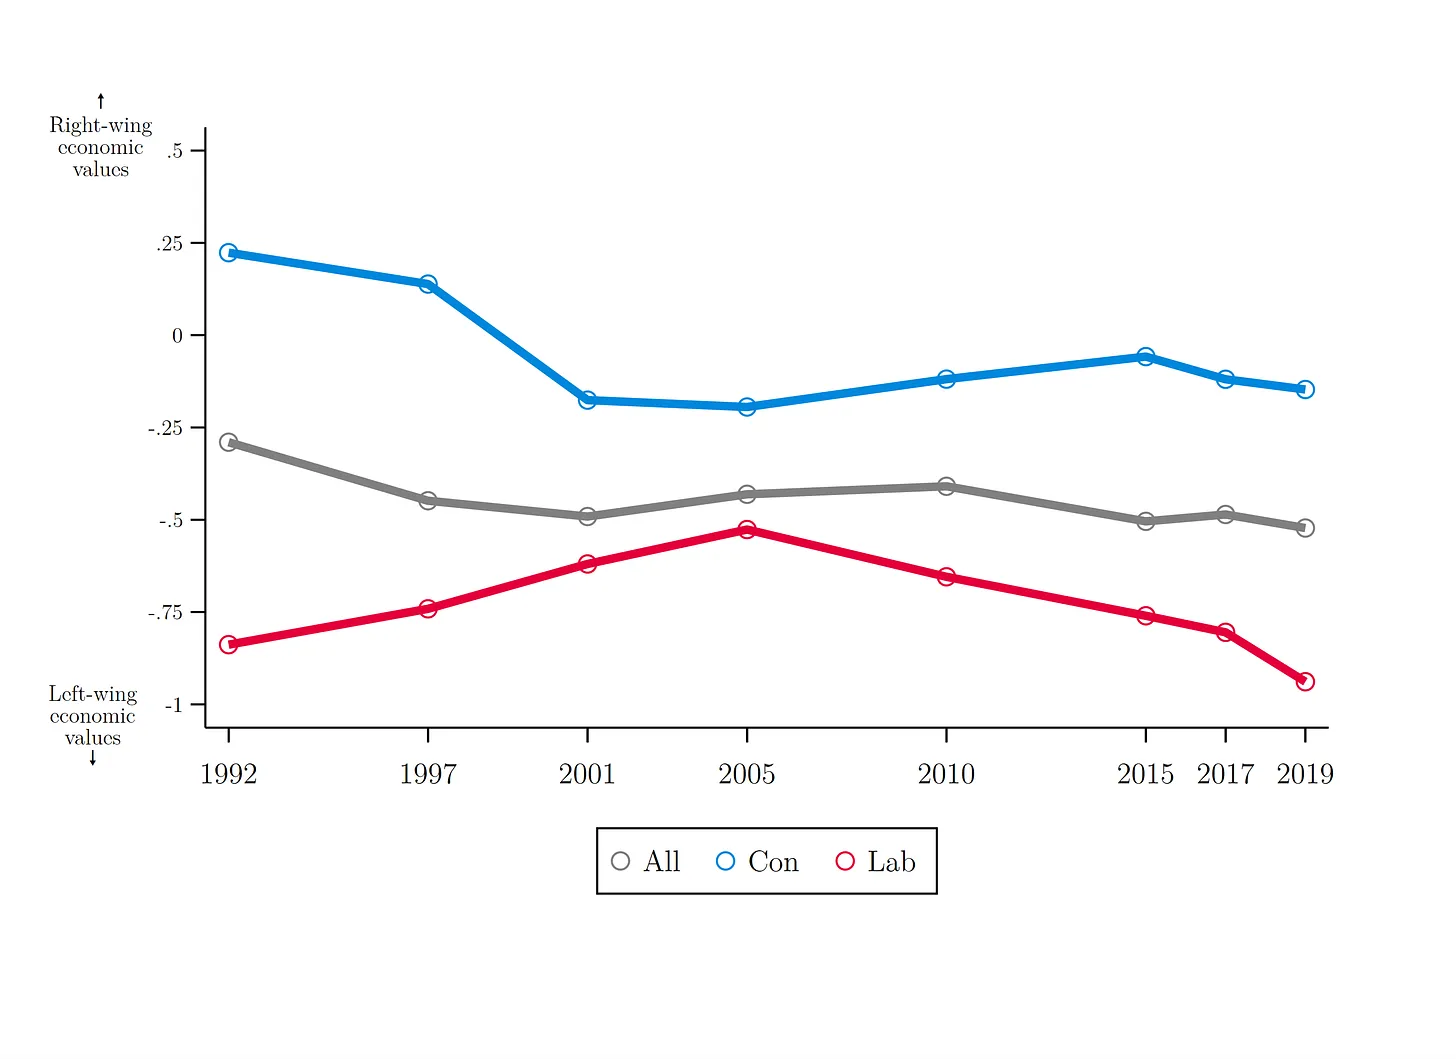 Despite what you may have heard, the British public are increasingly liberal and left-wing